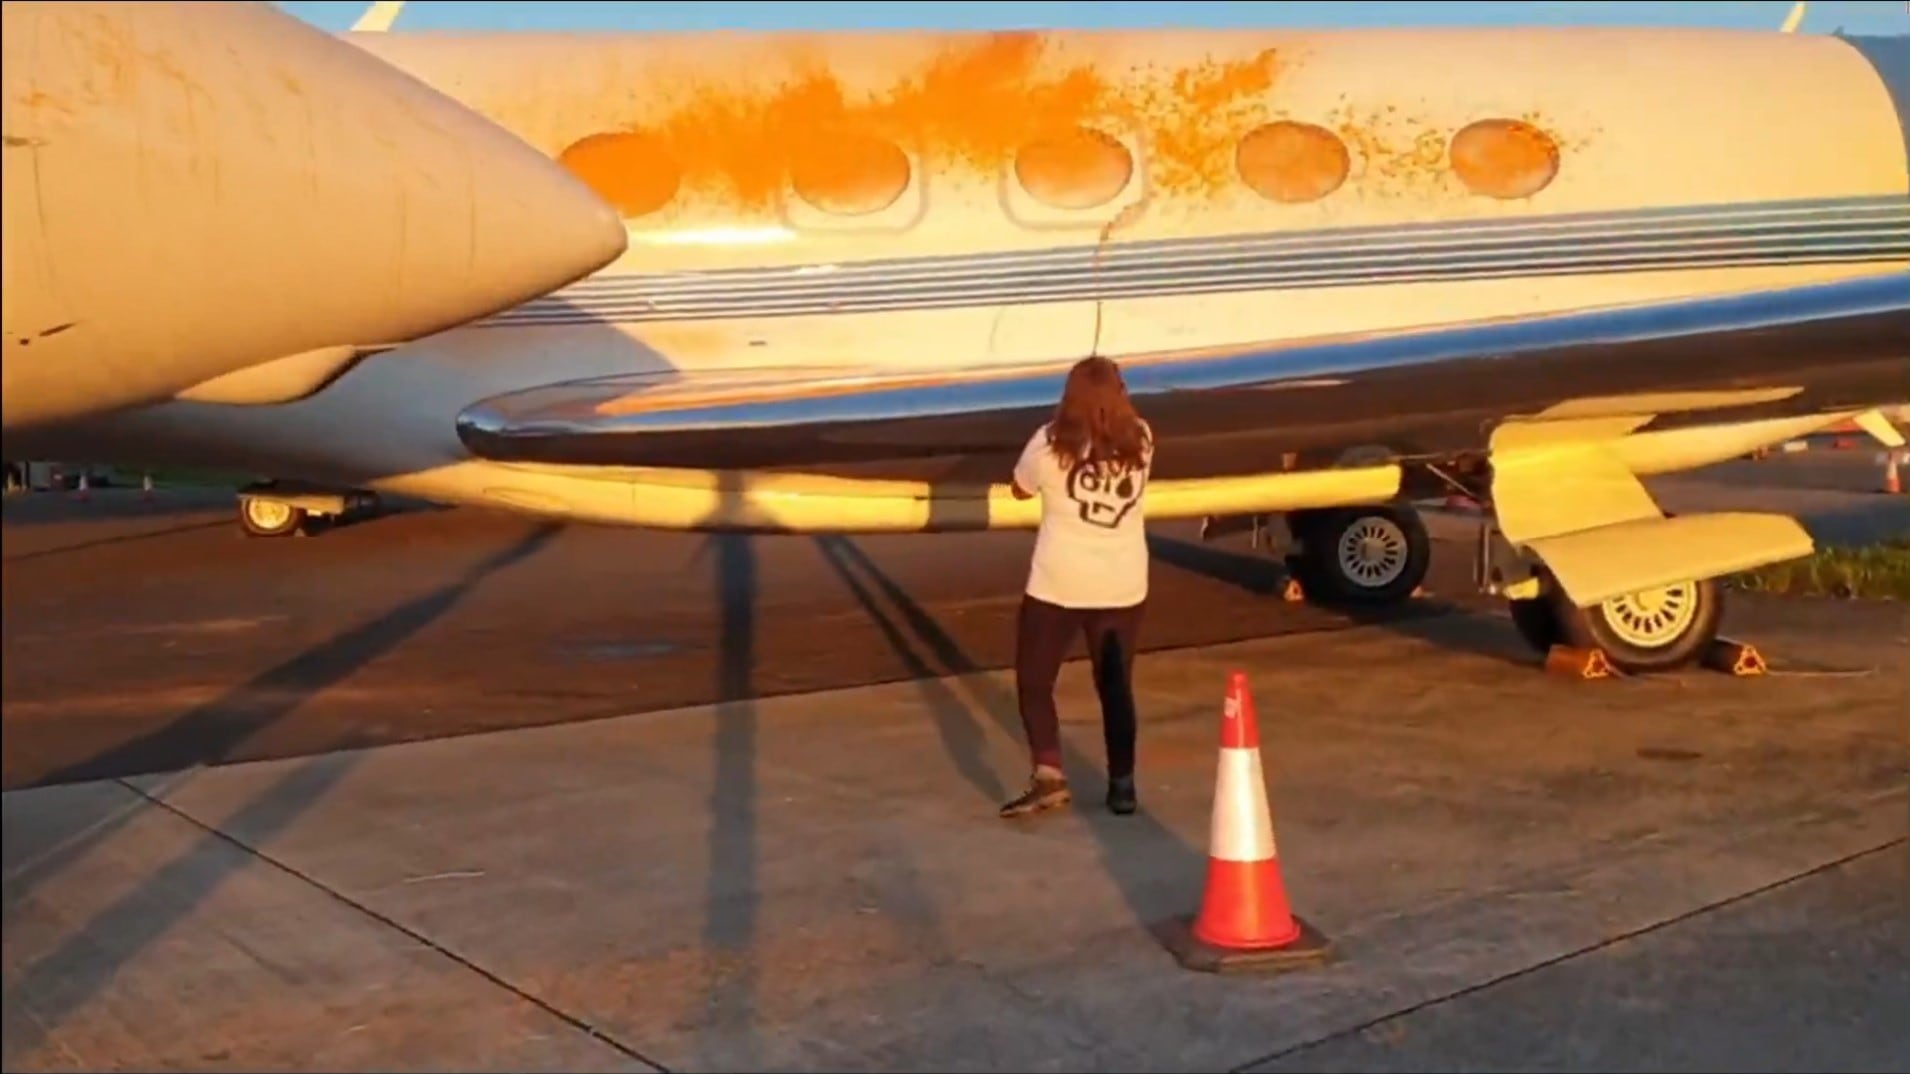 Screen grab taken from handout video of Just Stop Oil protesters spraying orange paint over parked private jets at London Stansted Airport in Essex